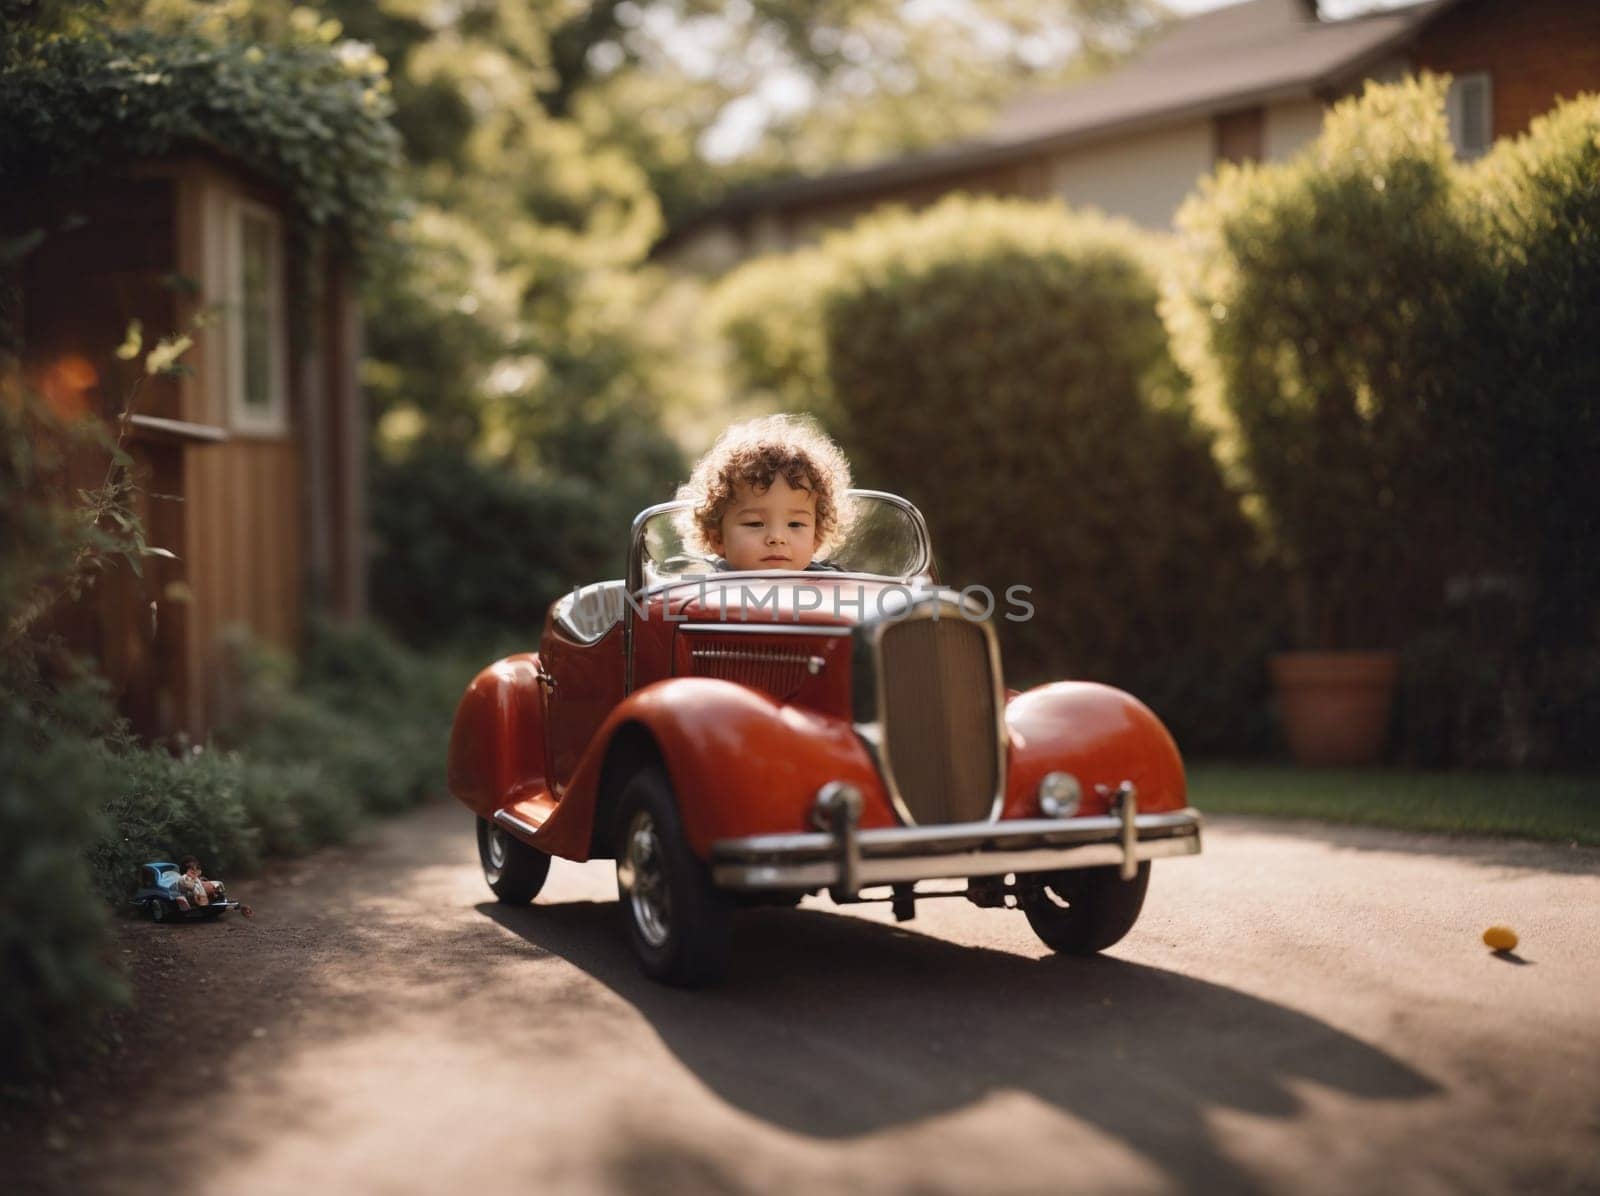 A little boy happily riding in a red car as it glides along a clean driveway.